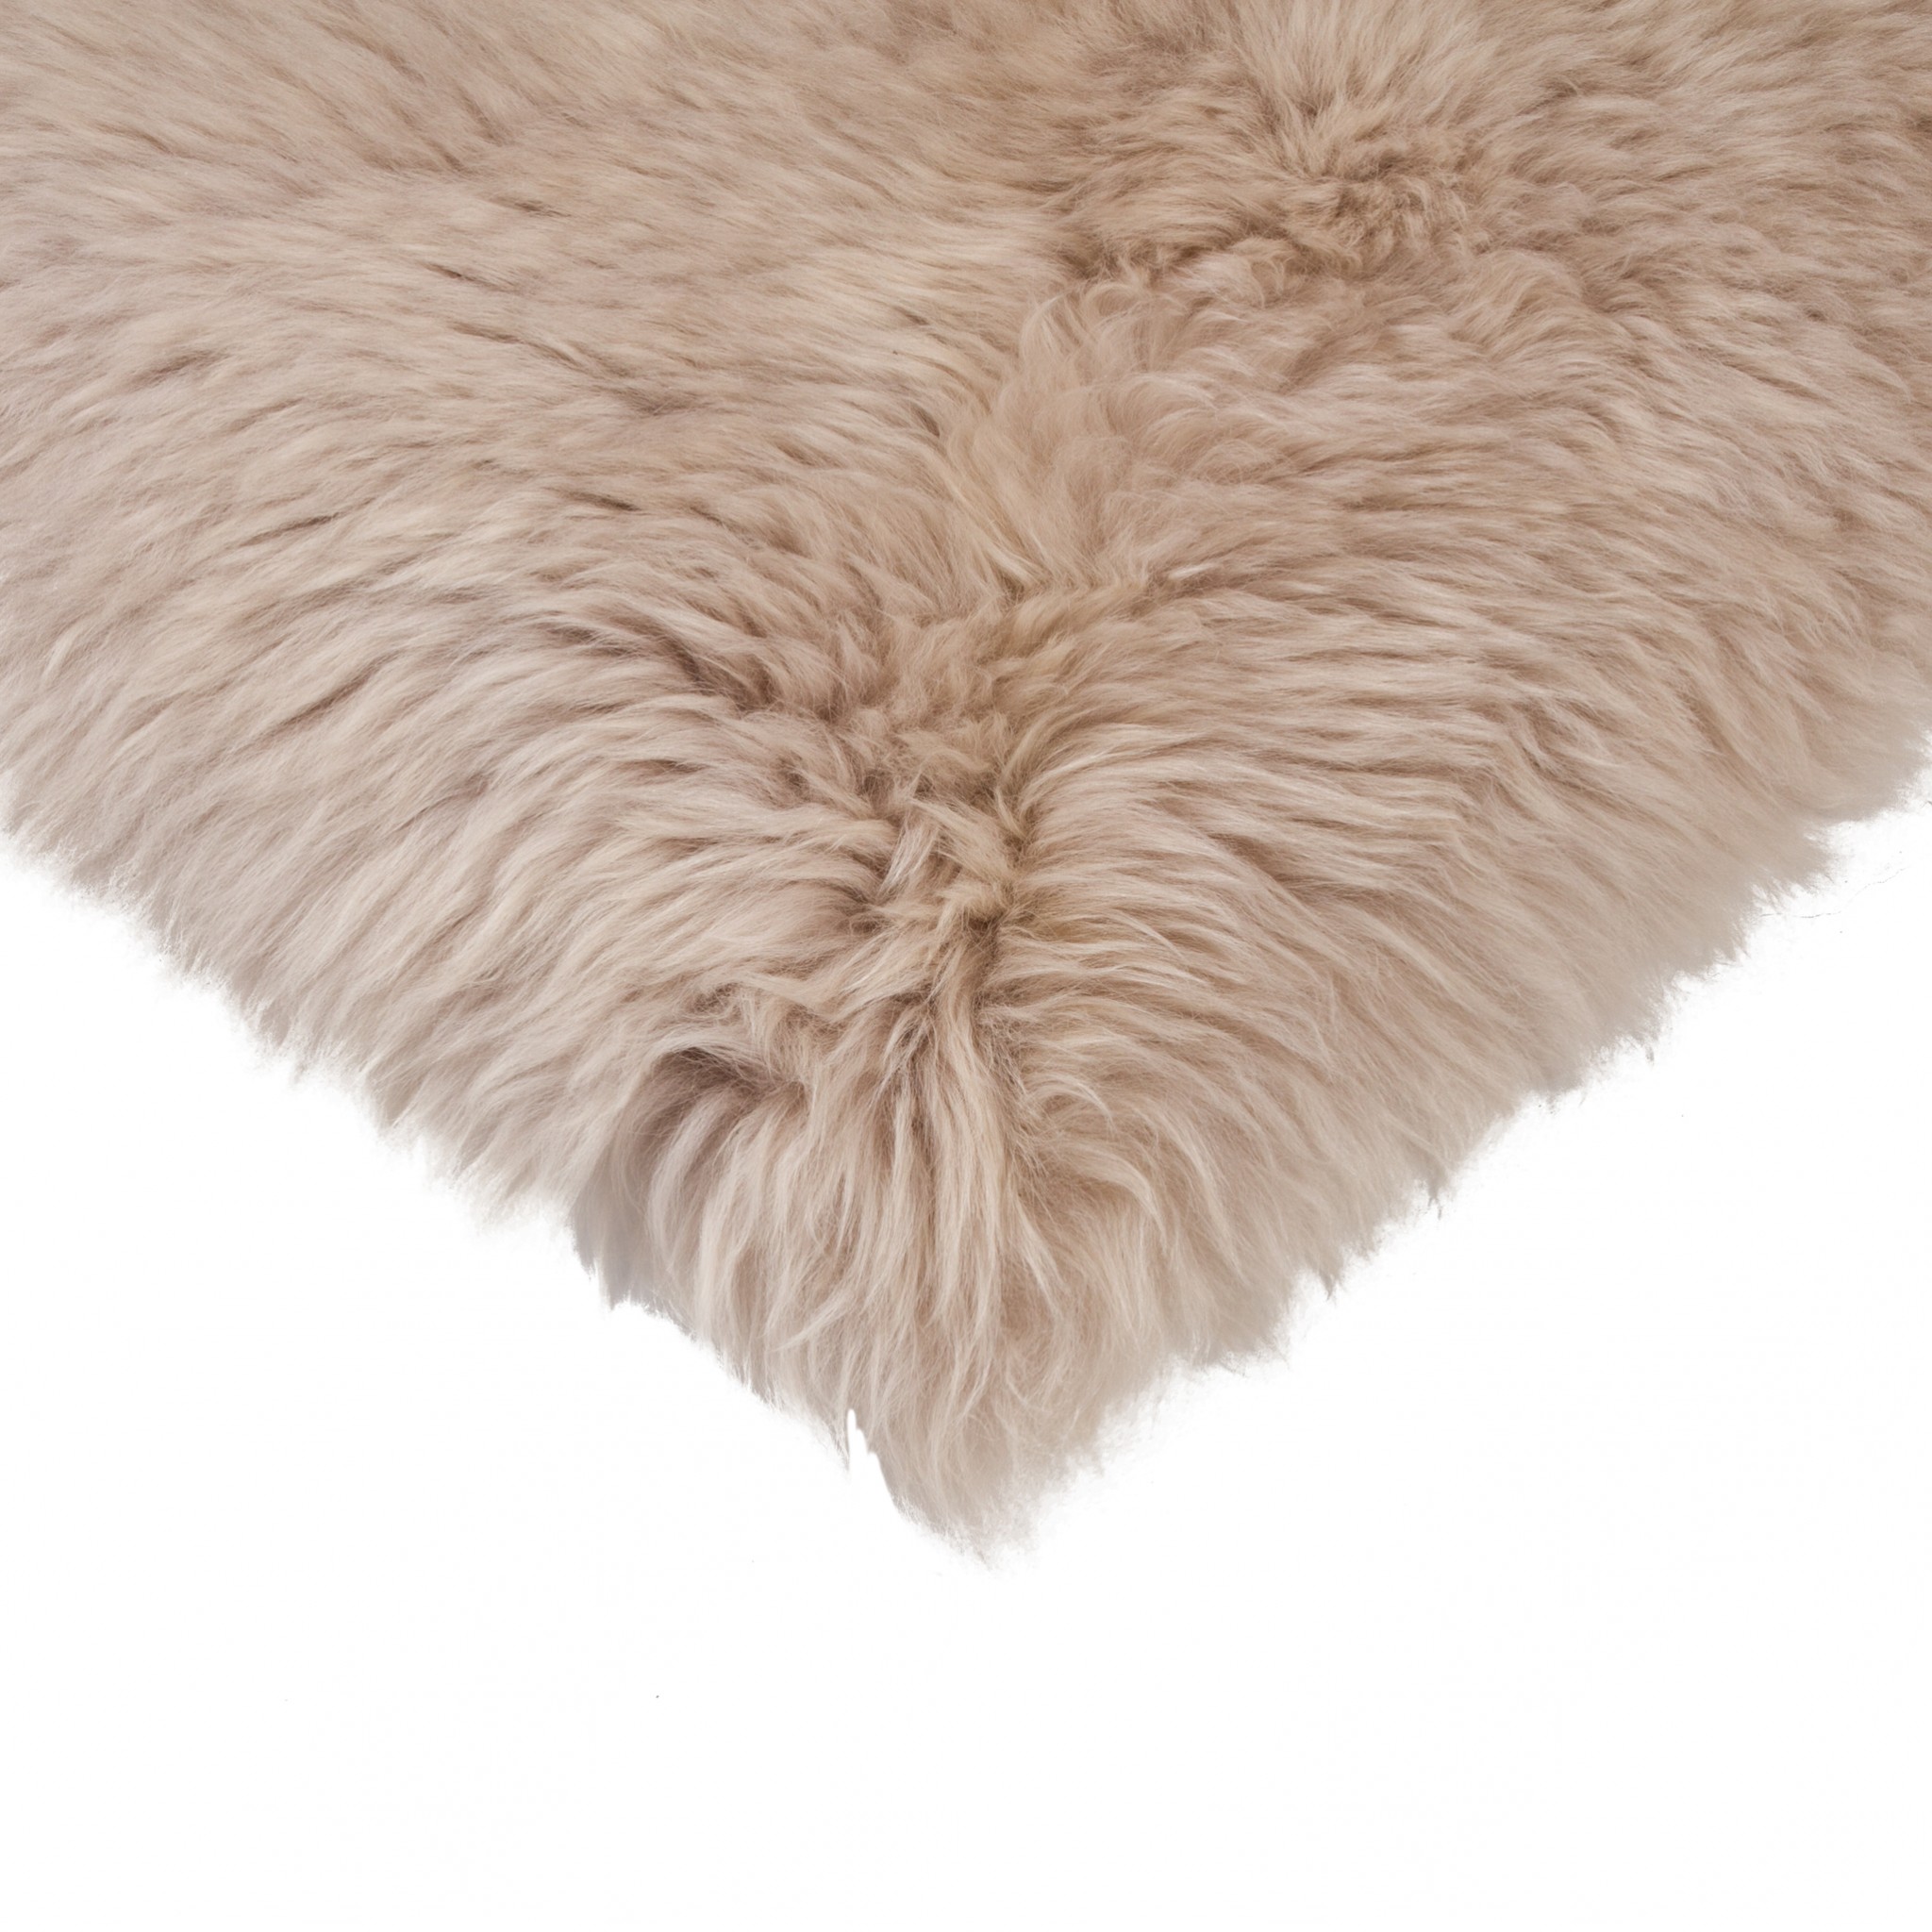 16" x 16" Taupe, Sheepskin - Seat/Chair Cover